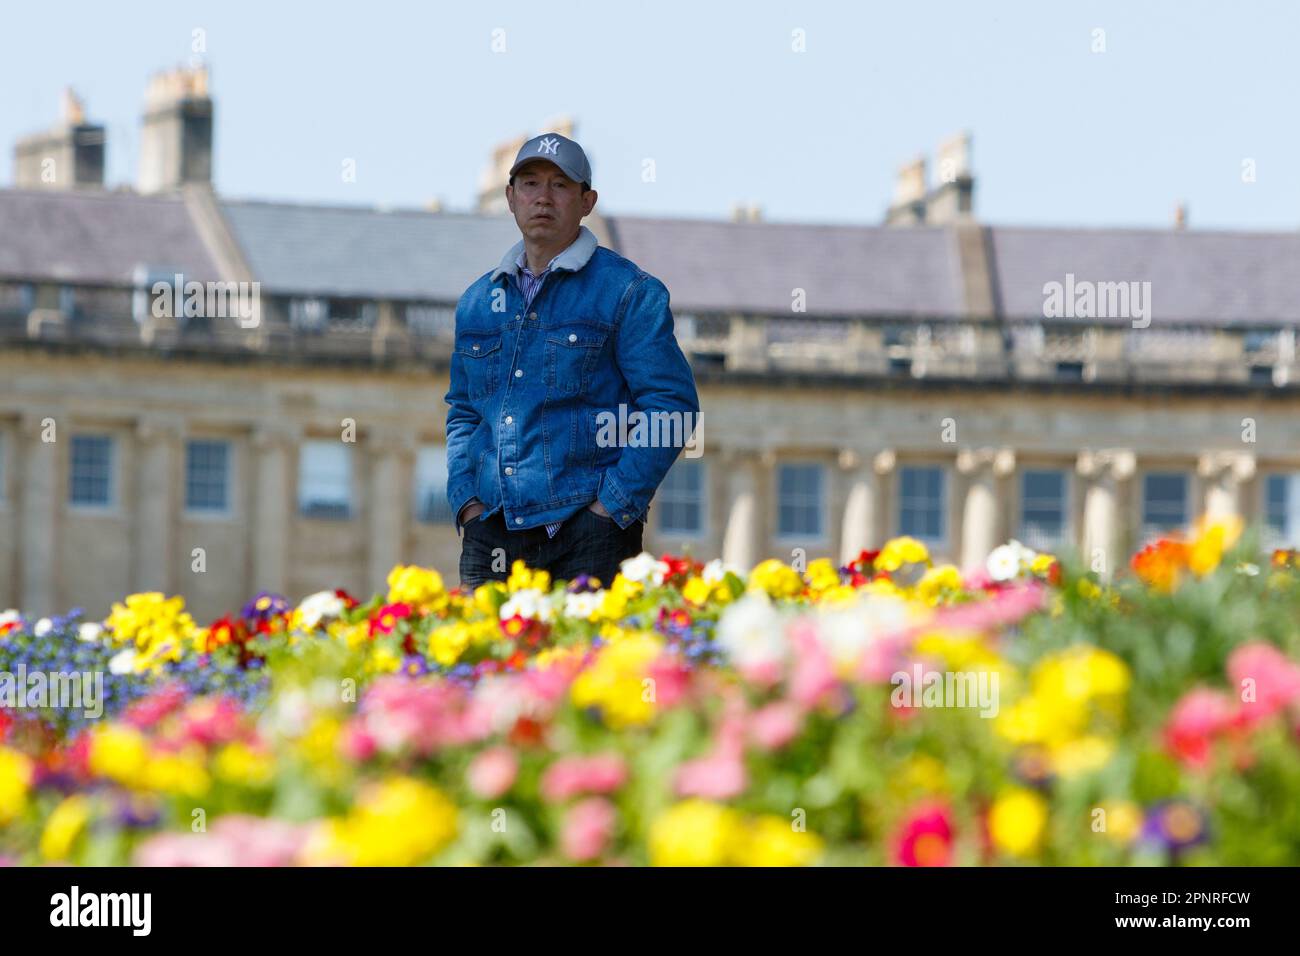 Bath, UK. 20th April, 2023. With Bath's famous Royal Crescent in the background a man is pictured walking past the colouful flower beds in Royal Victoria Park. Forecasters are predicting that cooler and more overcast weather is to come in the next few days. Credit: Lynchpics/Alamy Live News Stock Photo